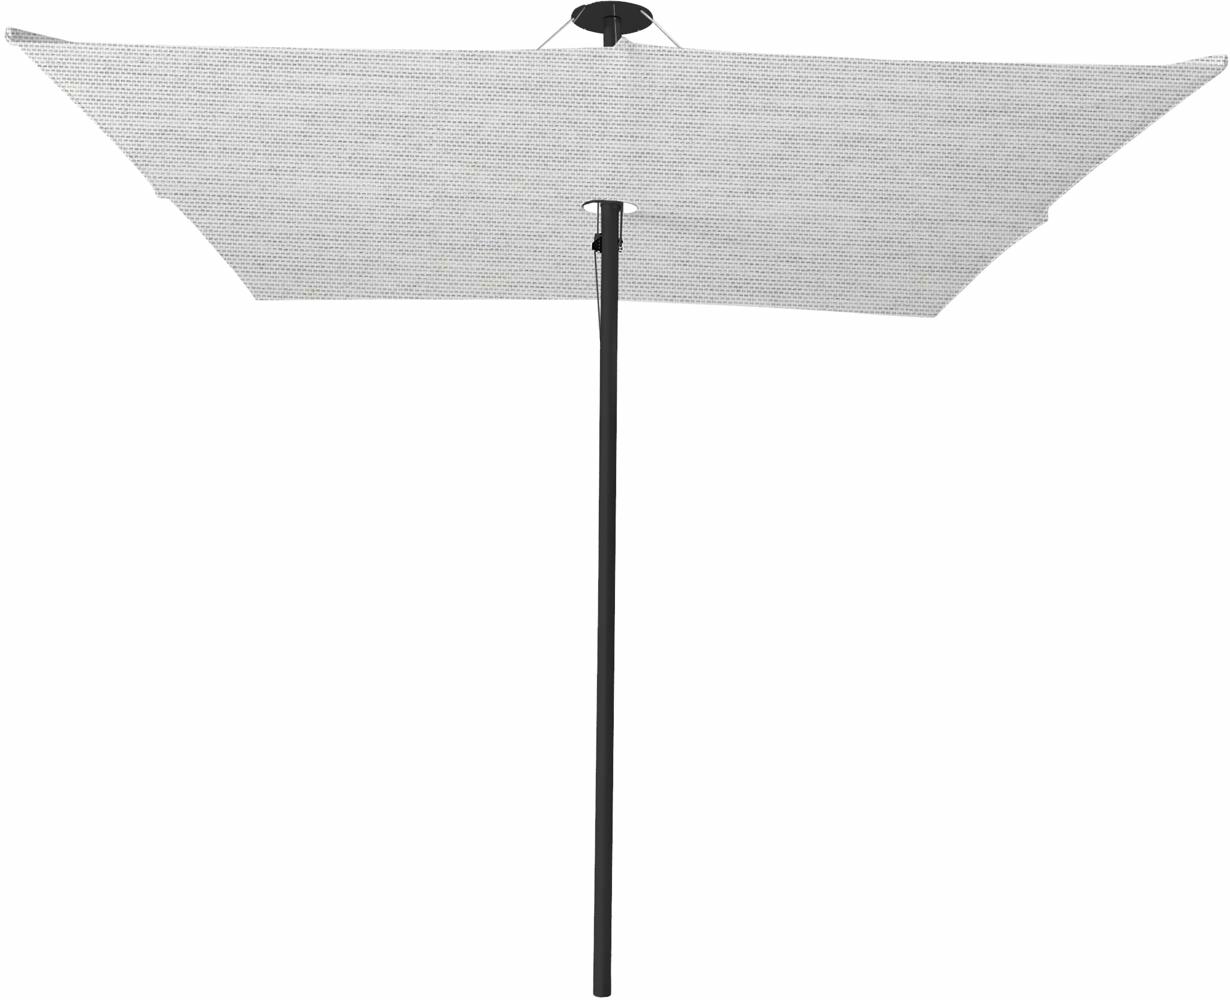 Infina center post umbrella, 3 m square, with frame in Black and Colorum Marble canopy.